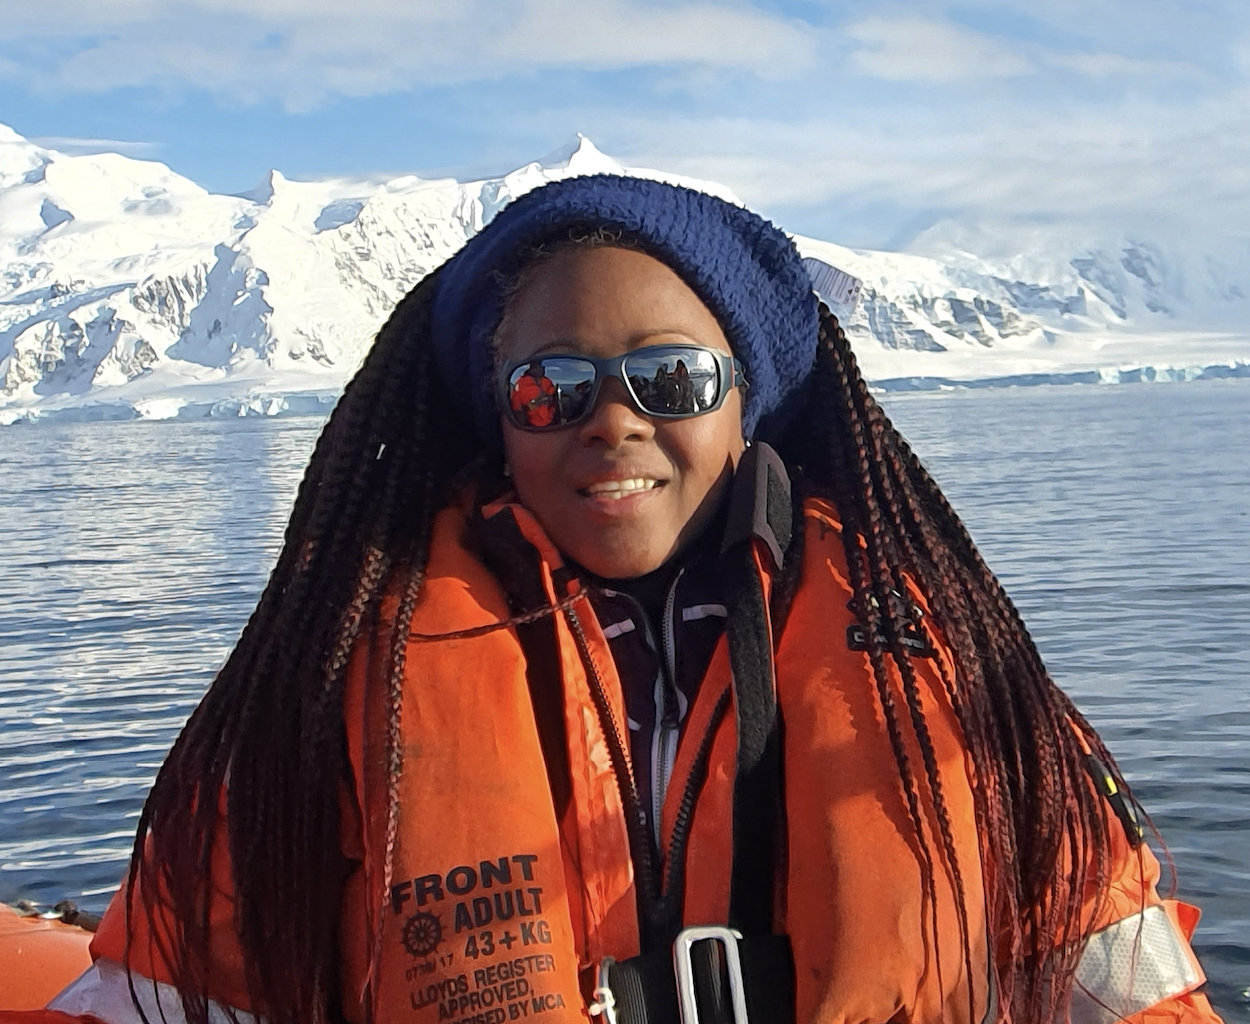 Nicole Logan-Park wears a bright orange life vest while on a boat, with a scene in the background of an icy fjord with mountains in the background.